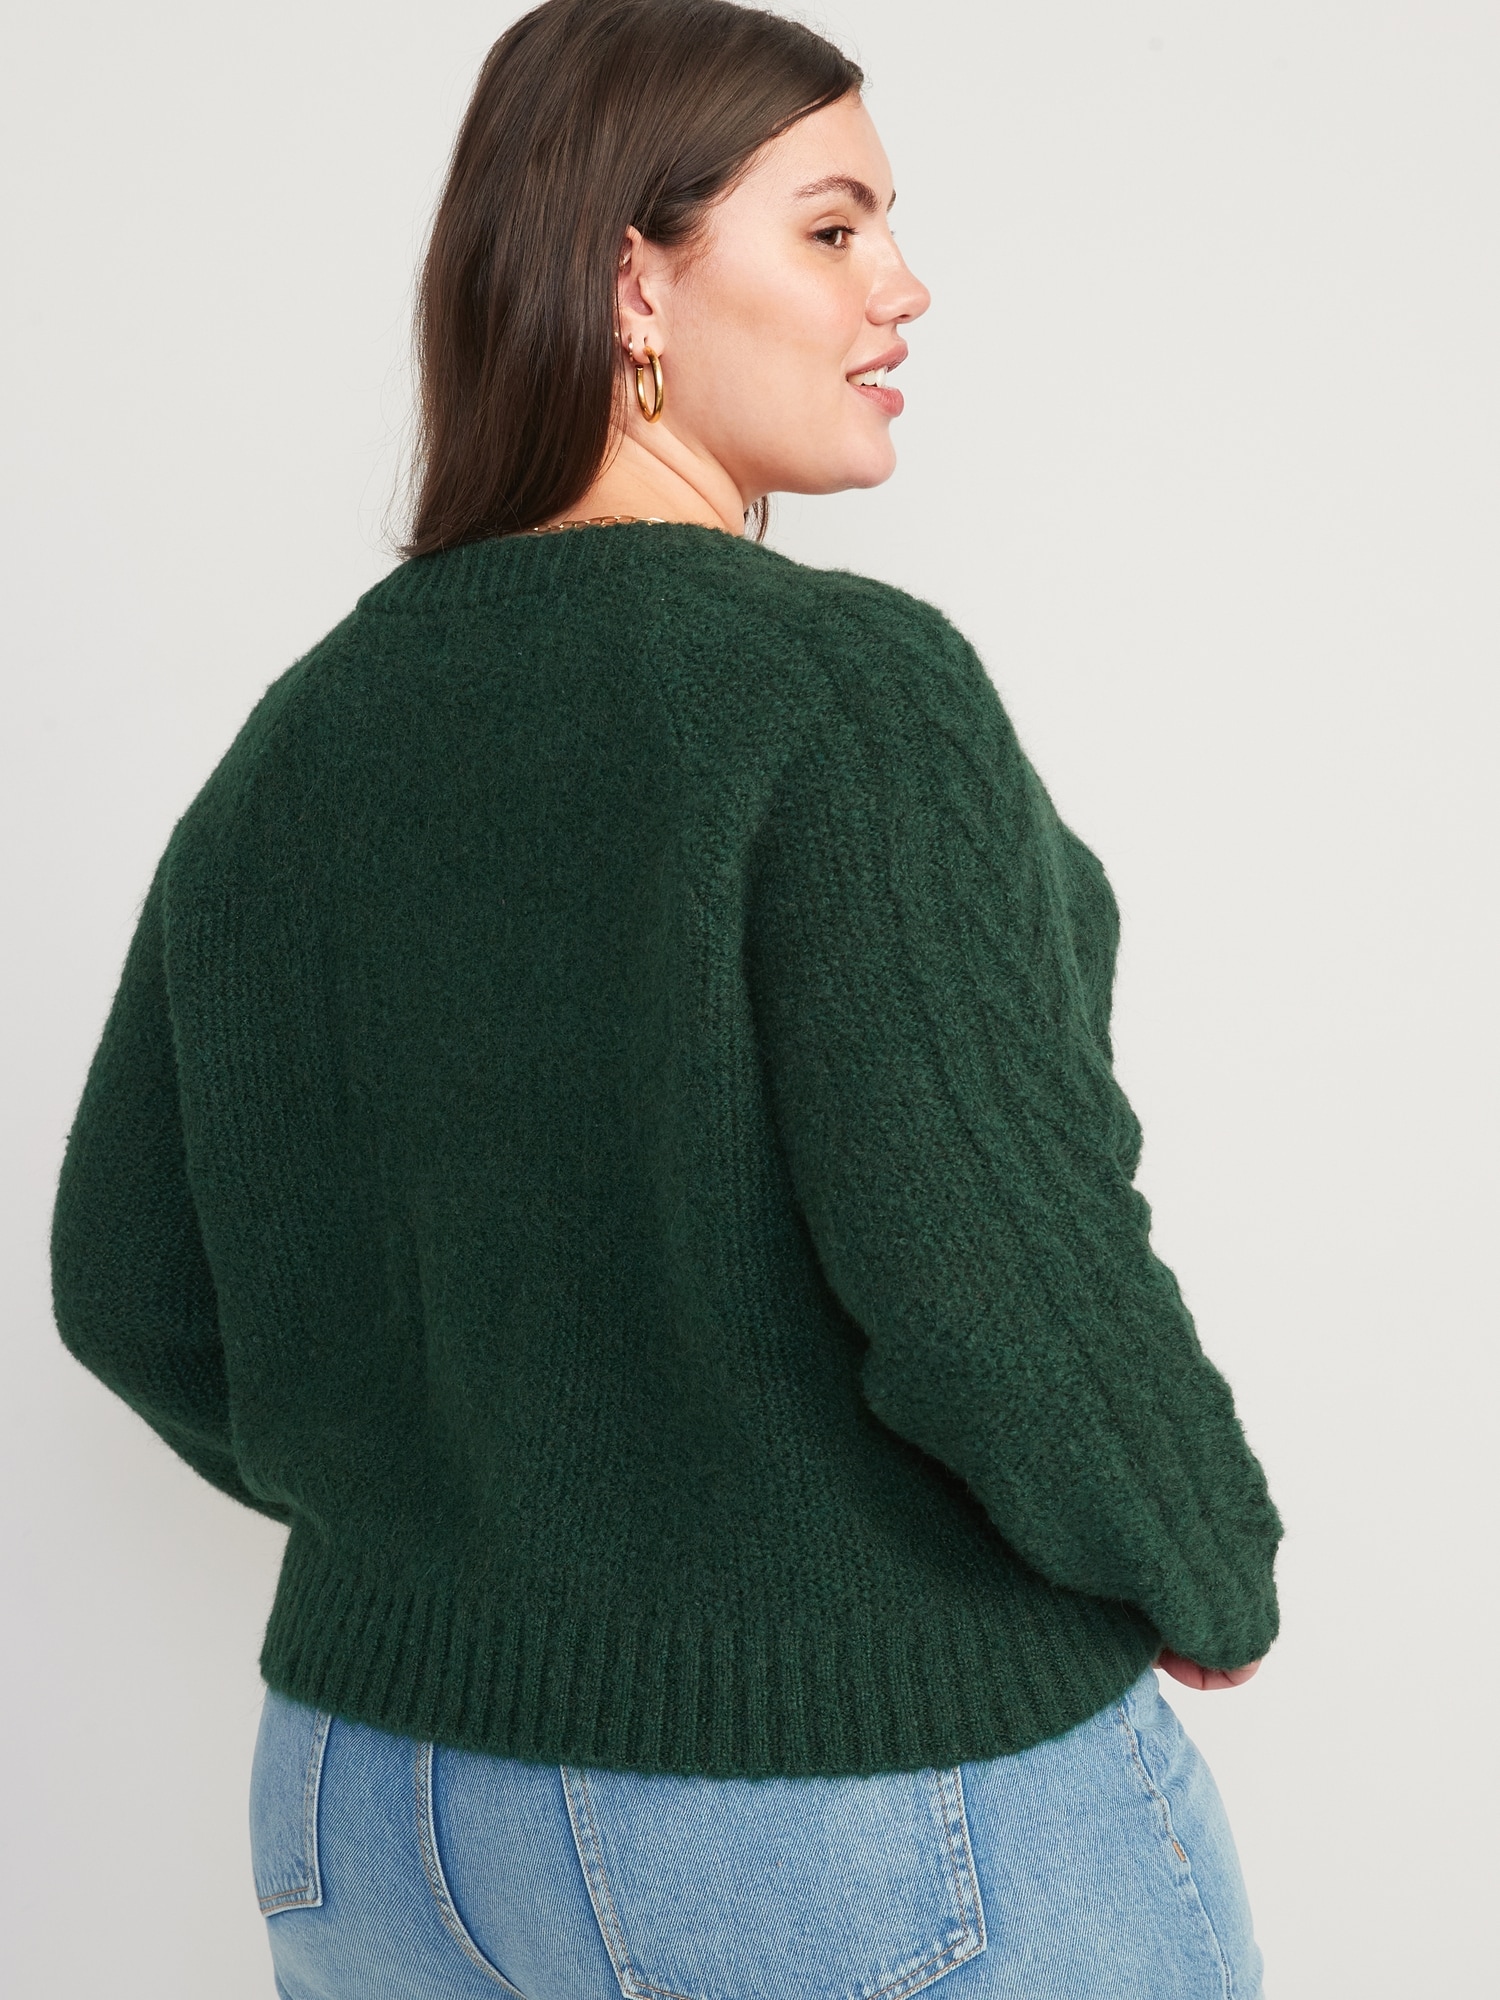 Cozy Cable-Knit Cardigan for Women | Old Navy